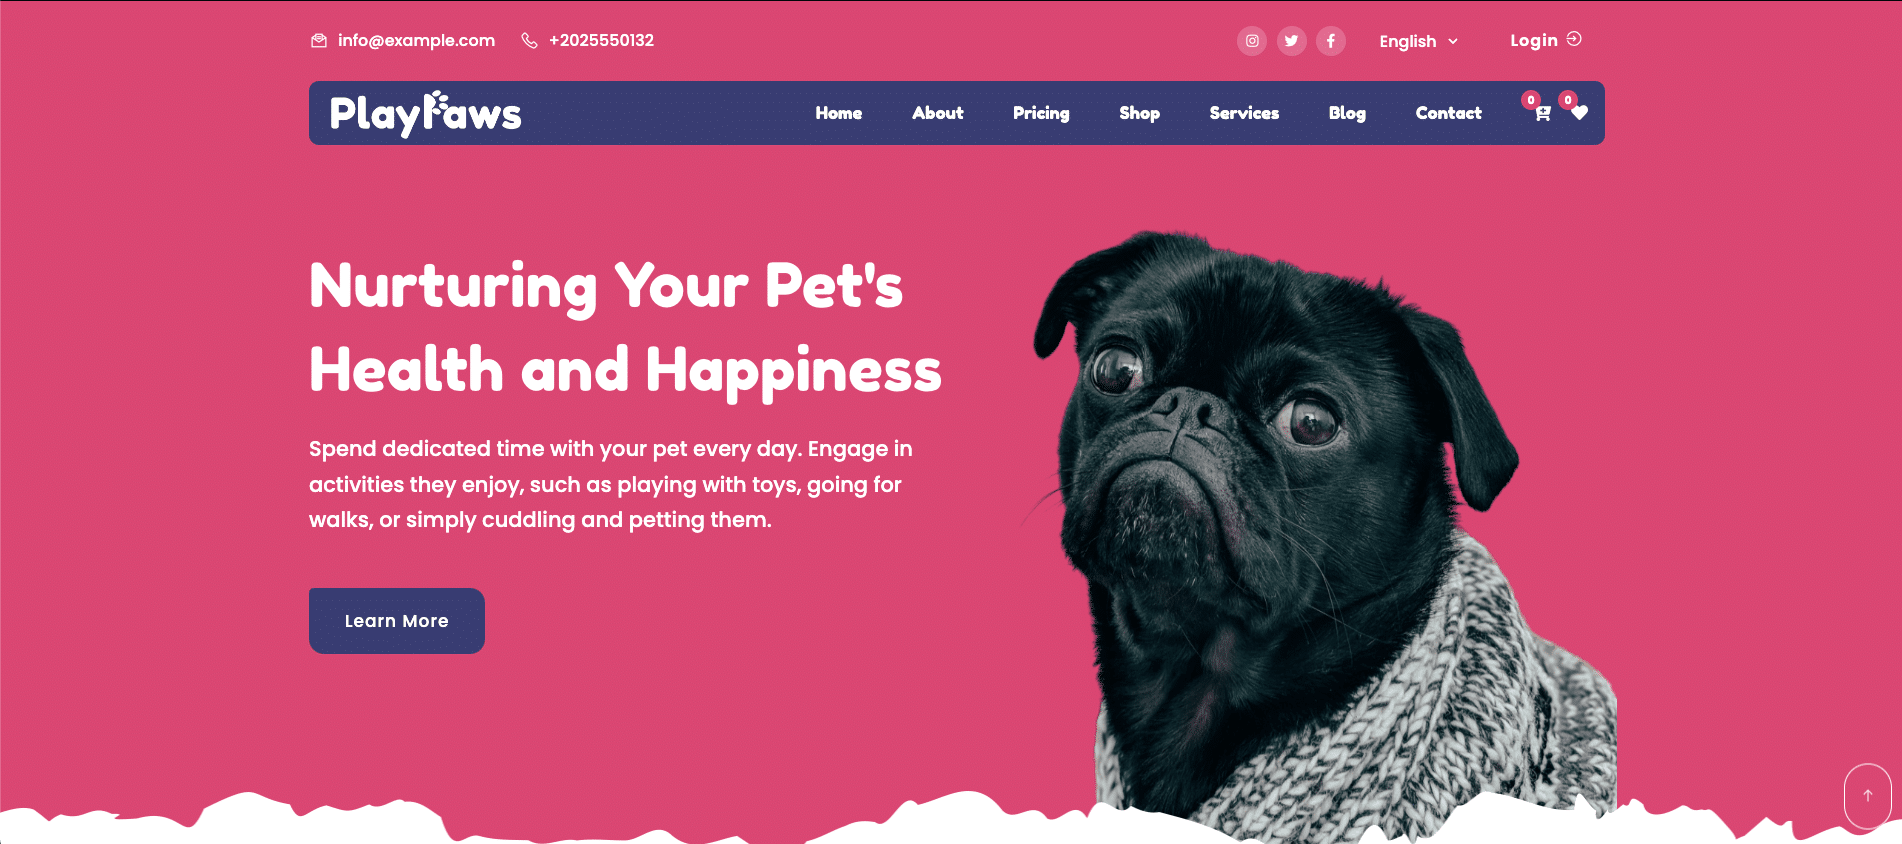 How to Create A Dog Breeding Website (Step-By-Step Guide) 12